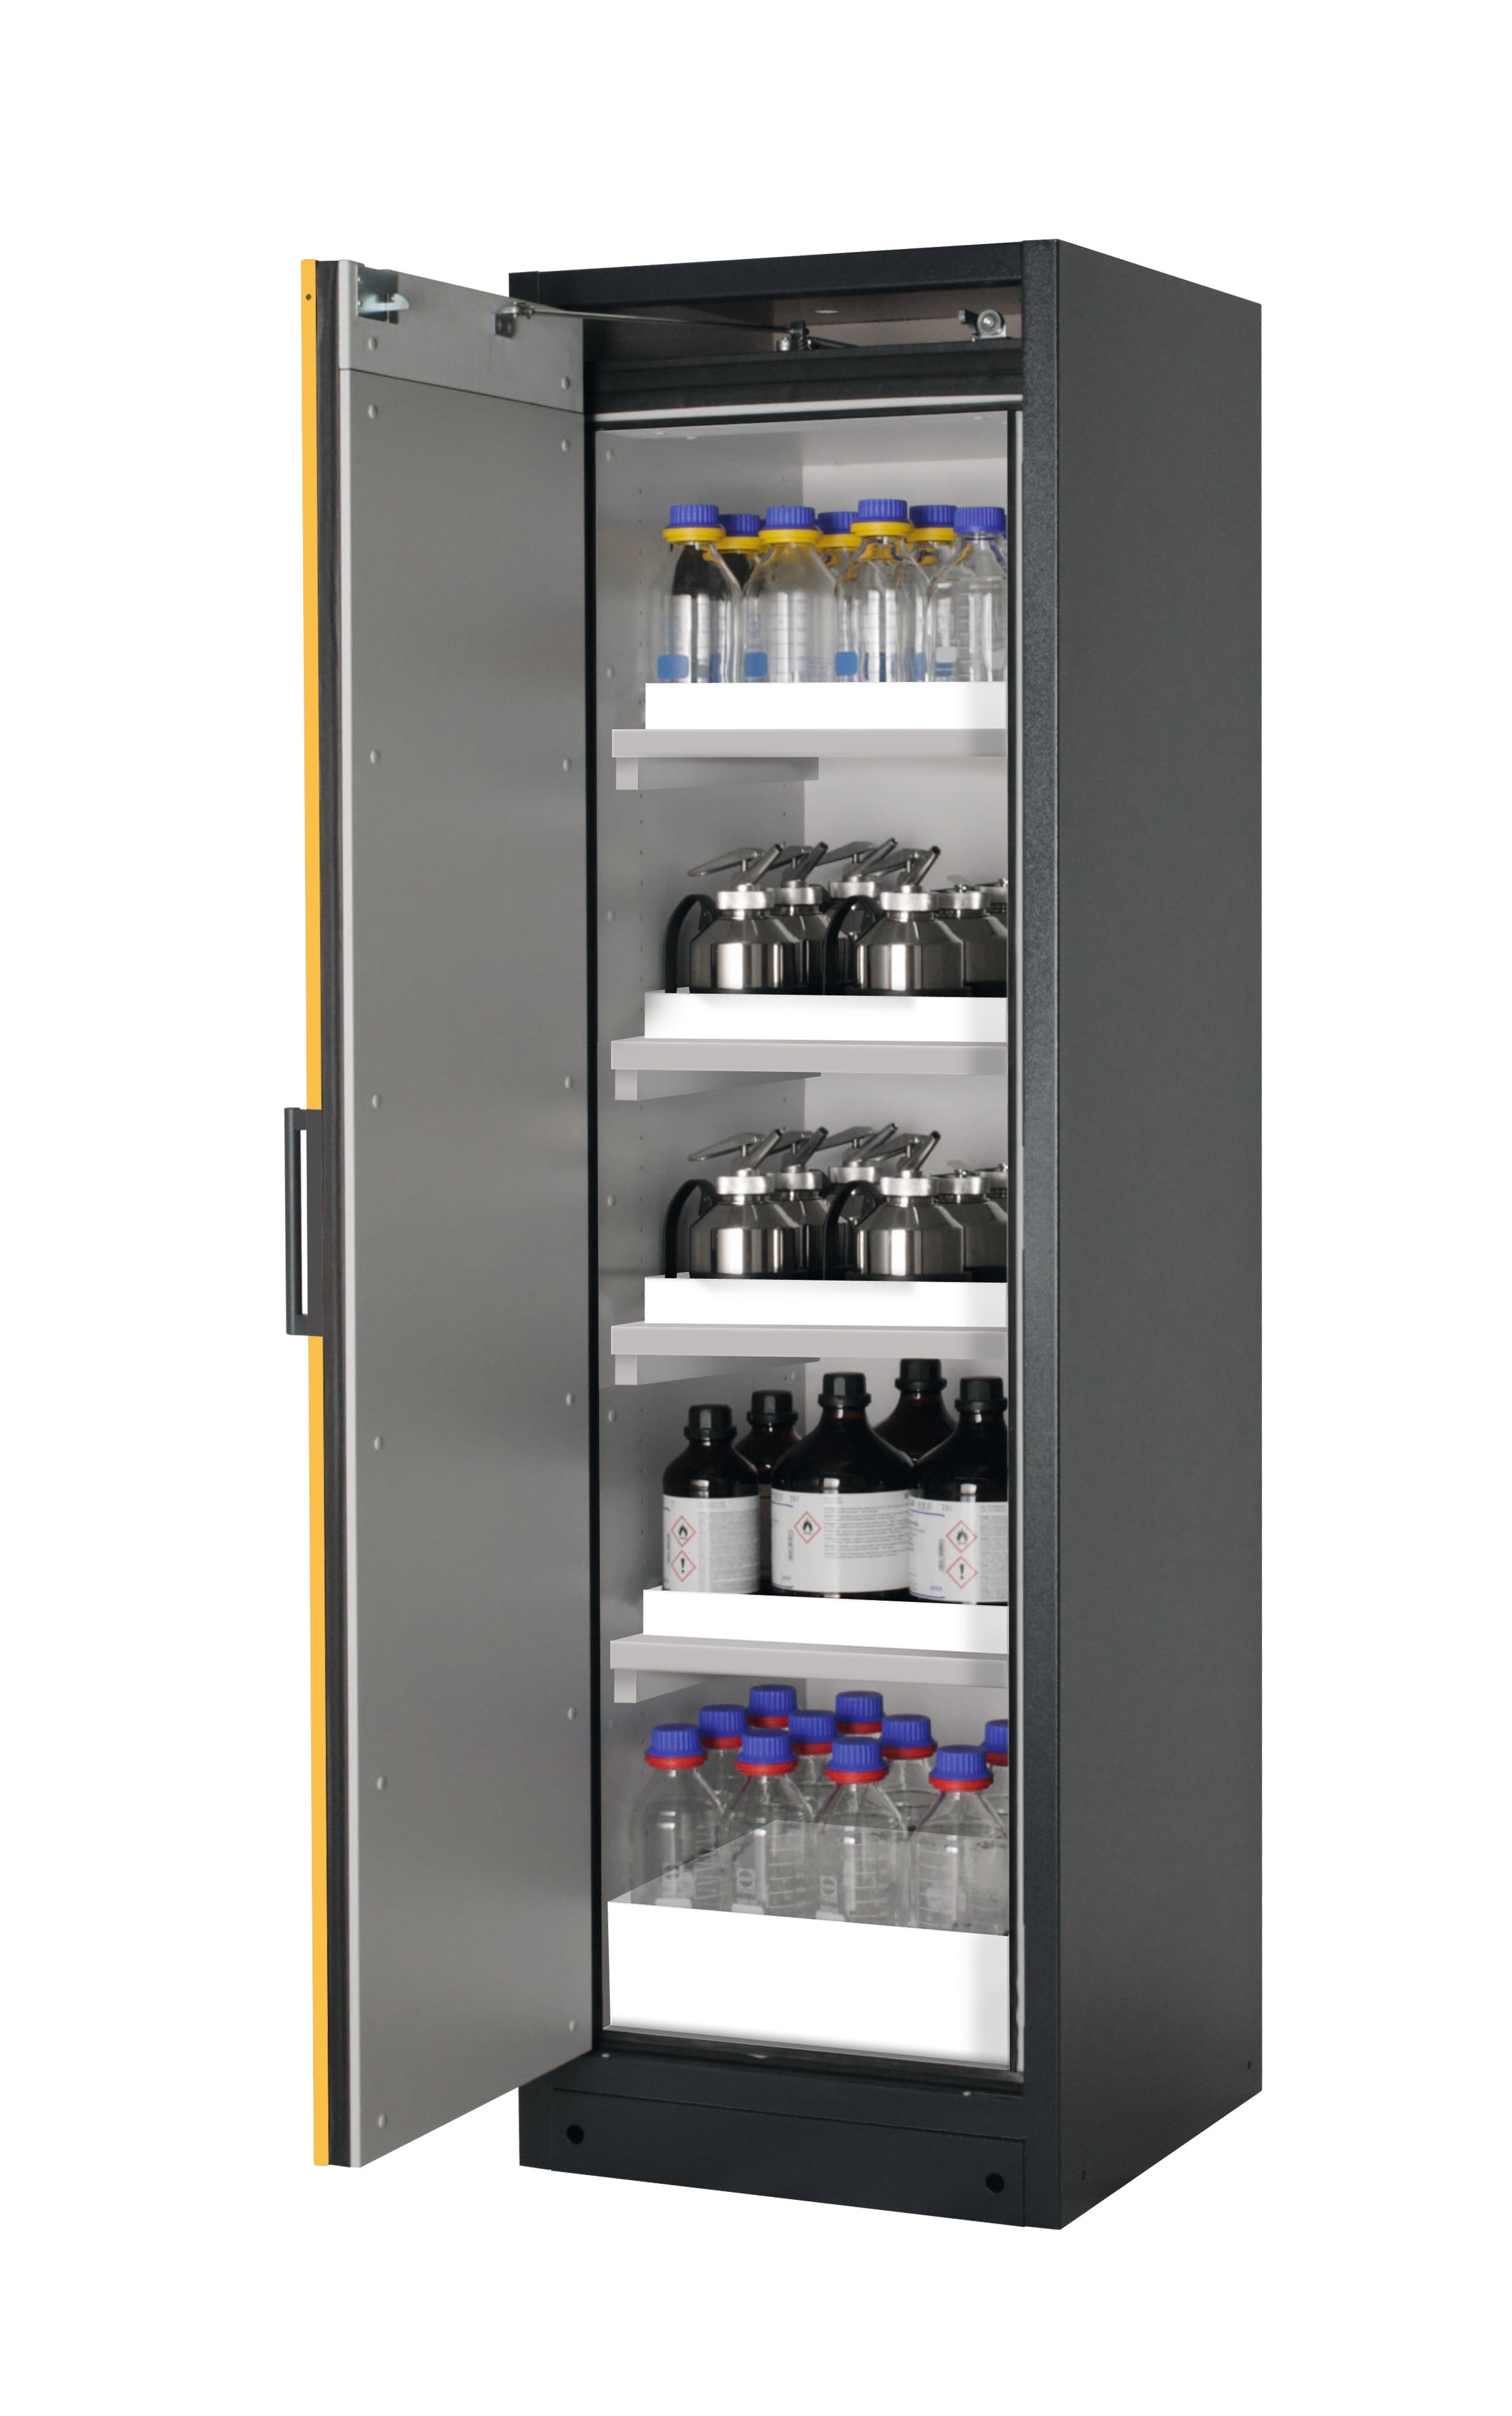 Type 90 safety storage cabinet Q-CLASSIC-90 model Q90.195.060 in warning yellow RAL 1004 with 4x tray shelf (standard) (polypropylene),